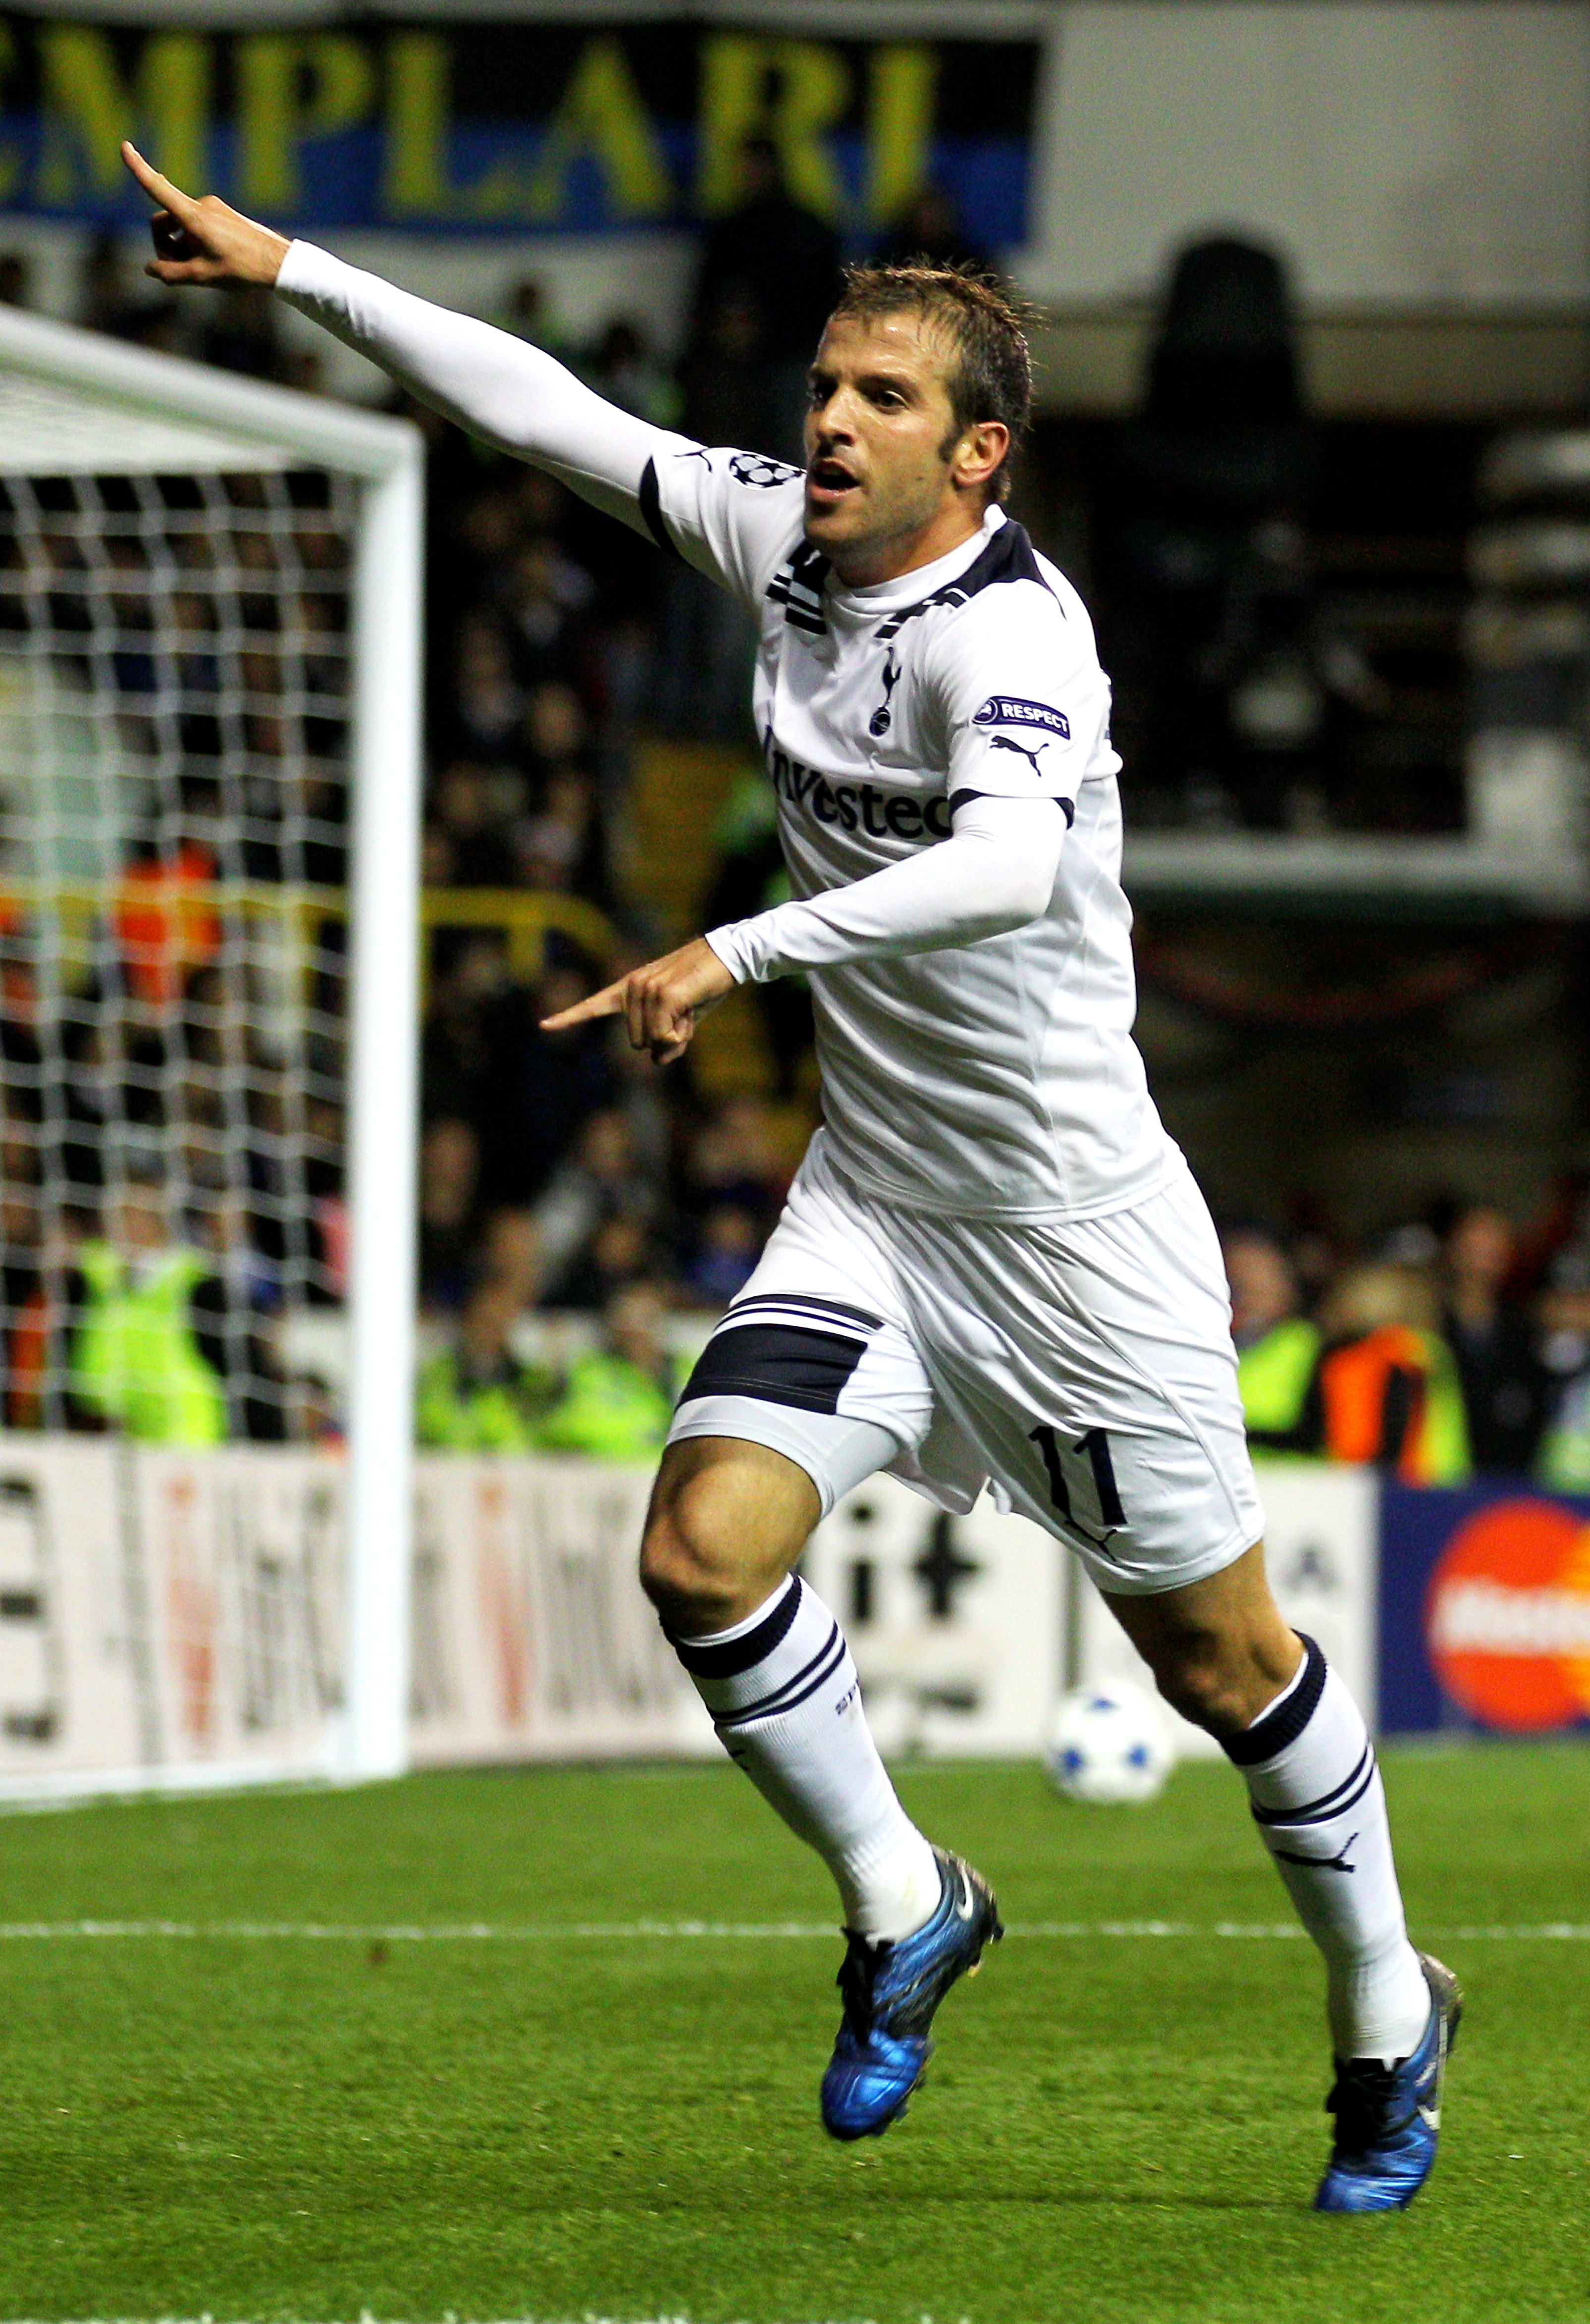 LONDON, ENGLAND - NOVEMBER 02:  Rafael van der Vaart of Spurs celebrates after scoring the opening goal during the UEFA Champions League Group A match between Tottenham Hotspur and Inter Milan at White Hart Lane on November 2, 2010 in London, England.  (P